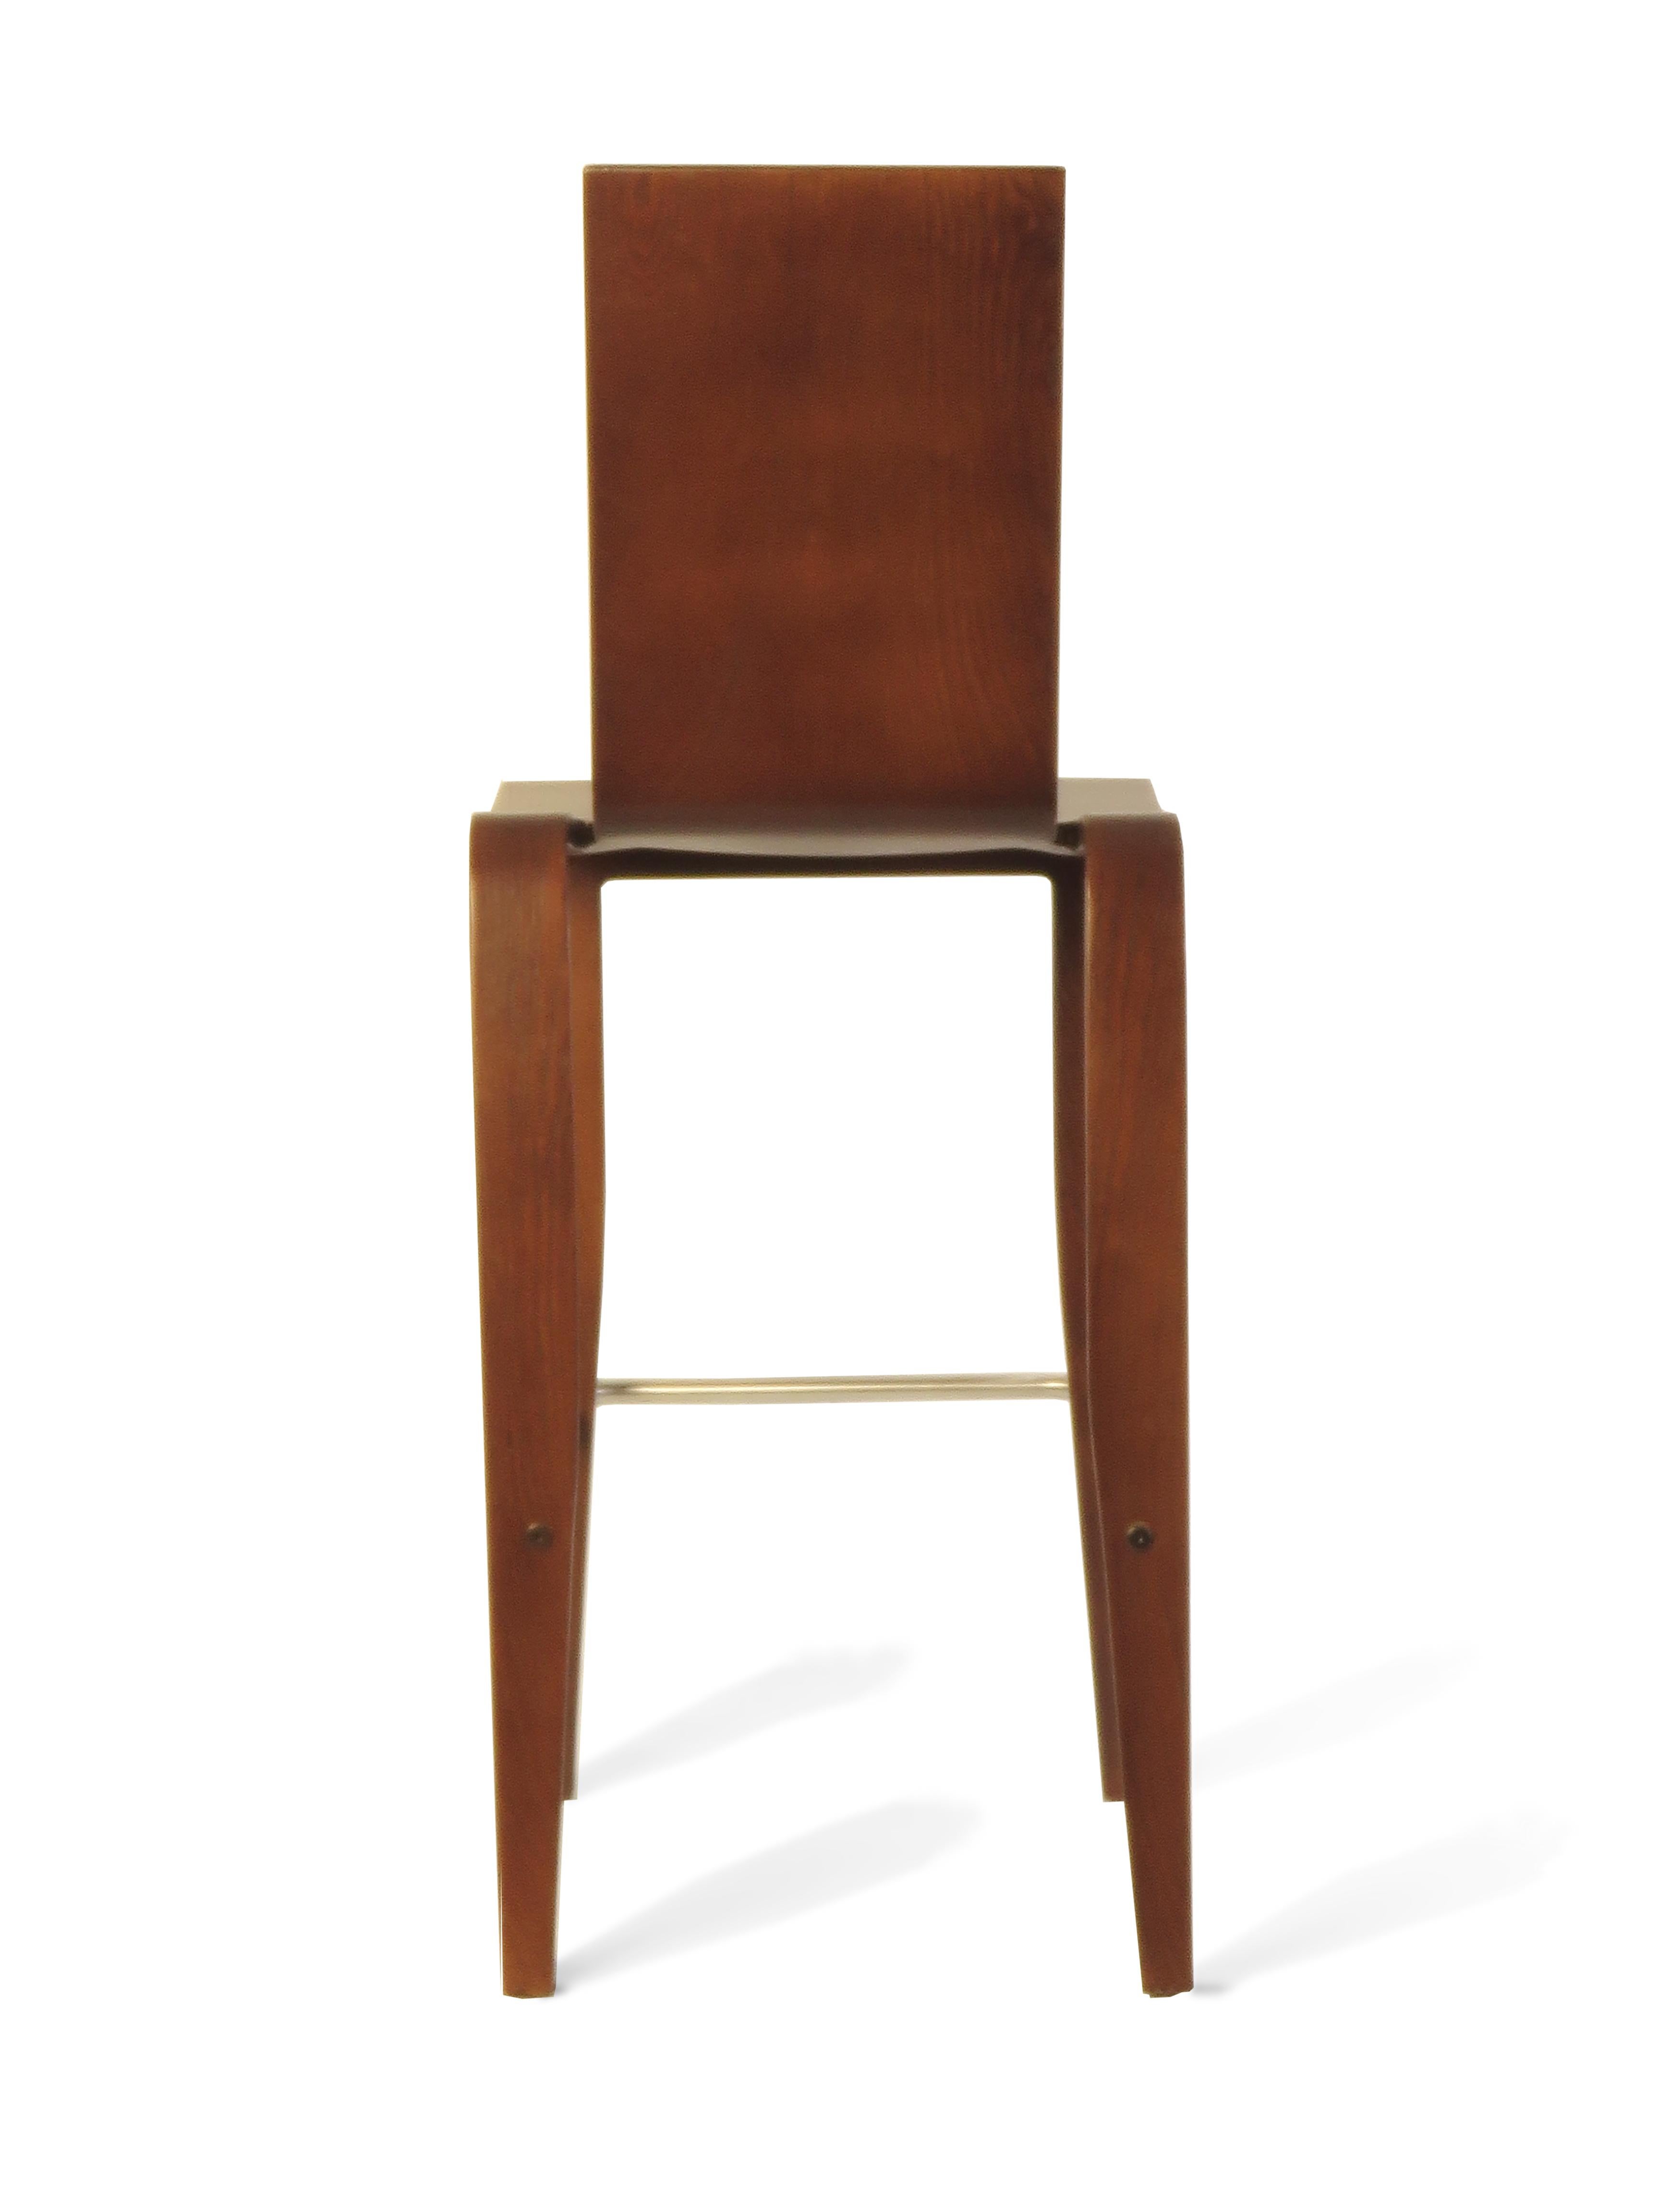 Modern Maple ply-bent molded plywood Bar Chair in Walnut finish. Vintage Peter Danko  For Sale